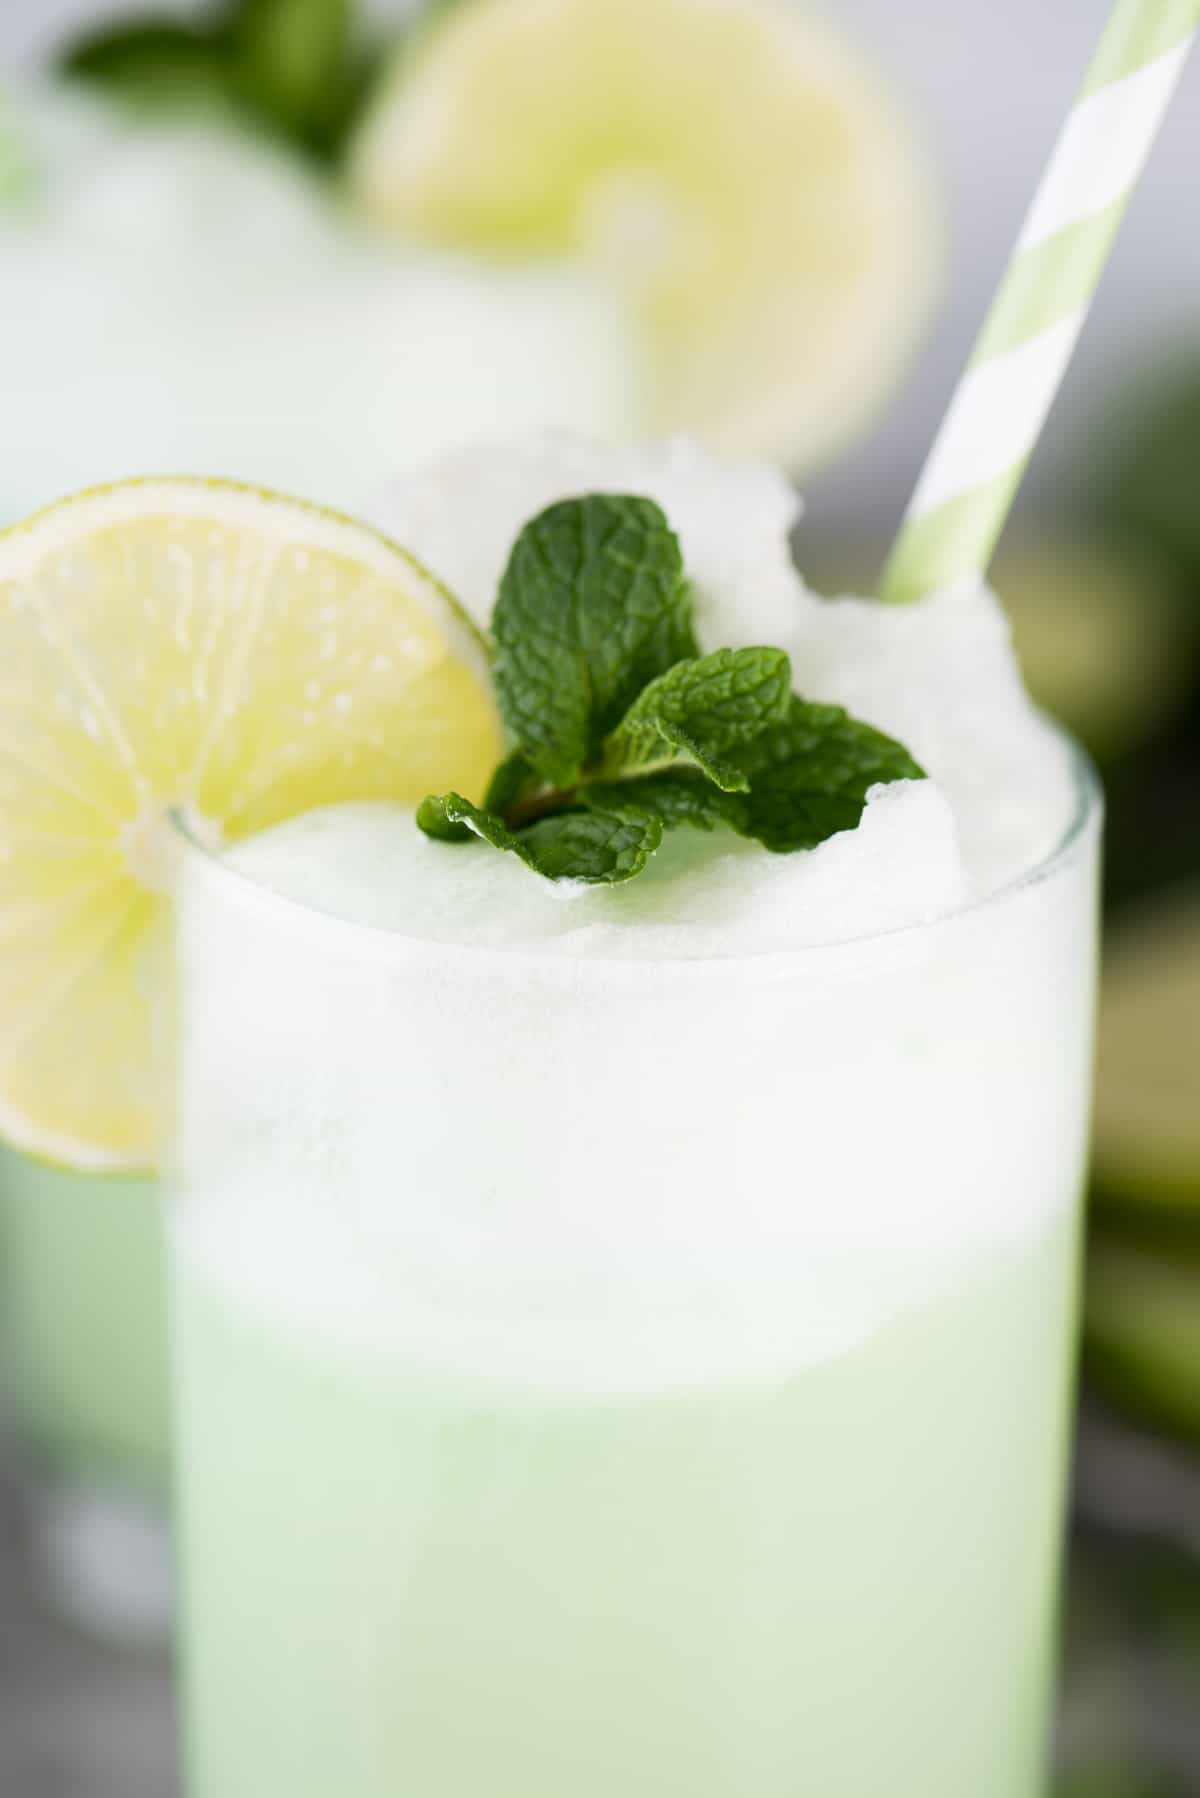 lime sherbet float in glass cup with lime slice, mint leaves and green straw